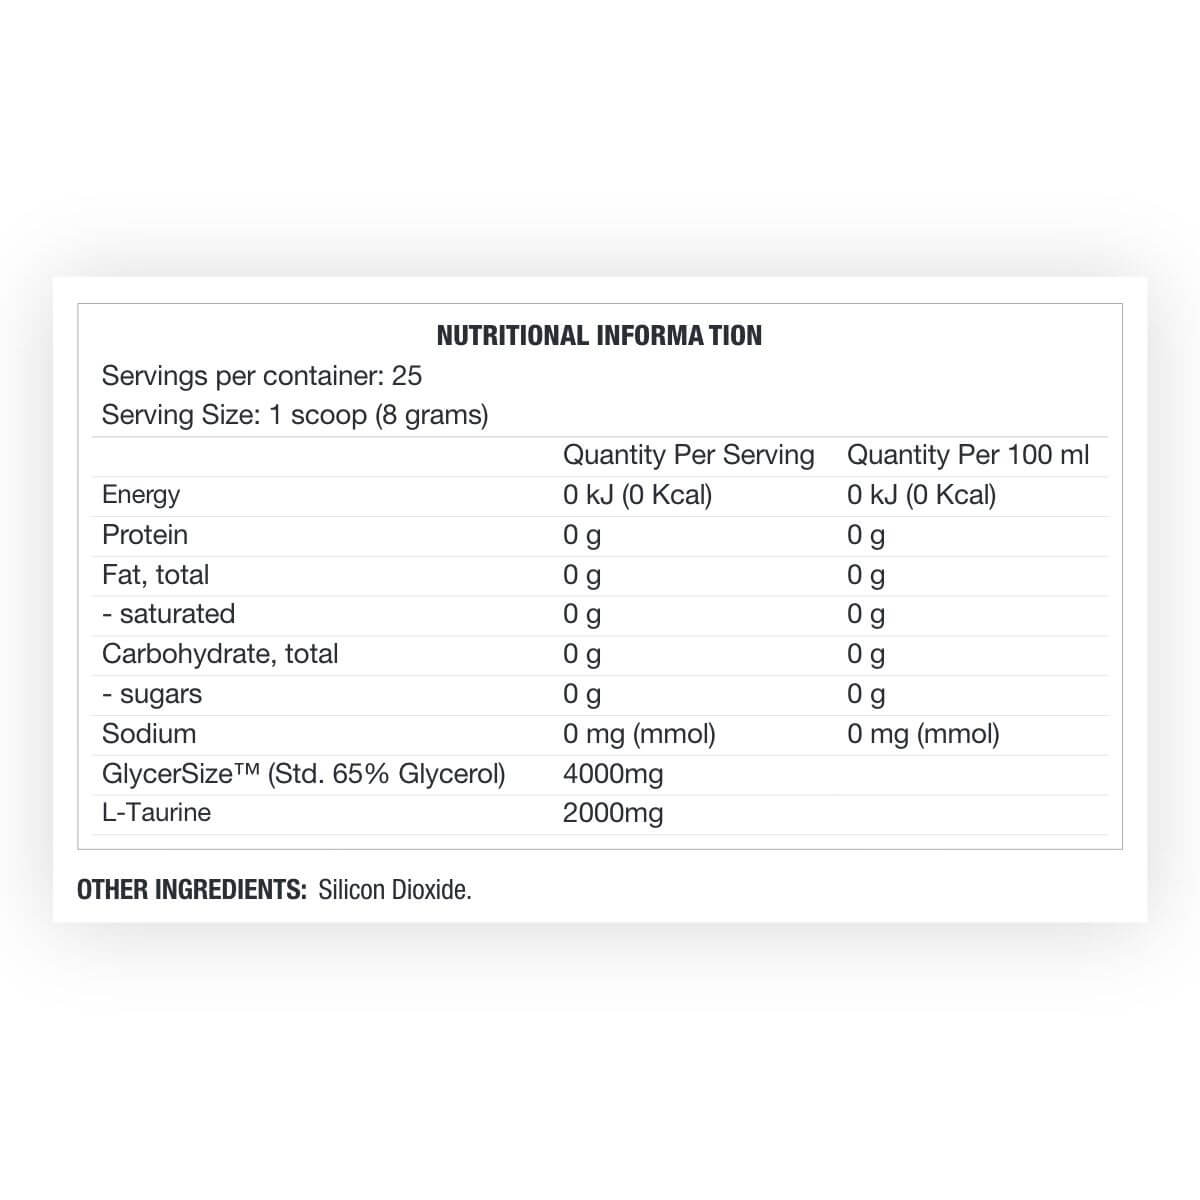 glycerswell_nutritional_1